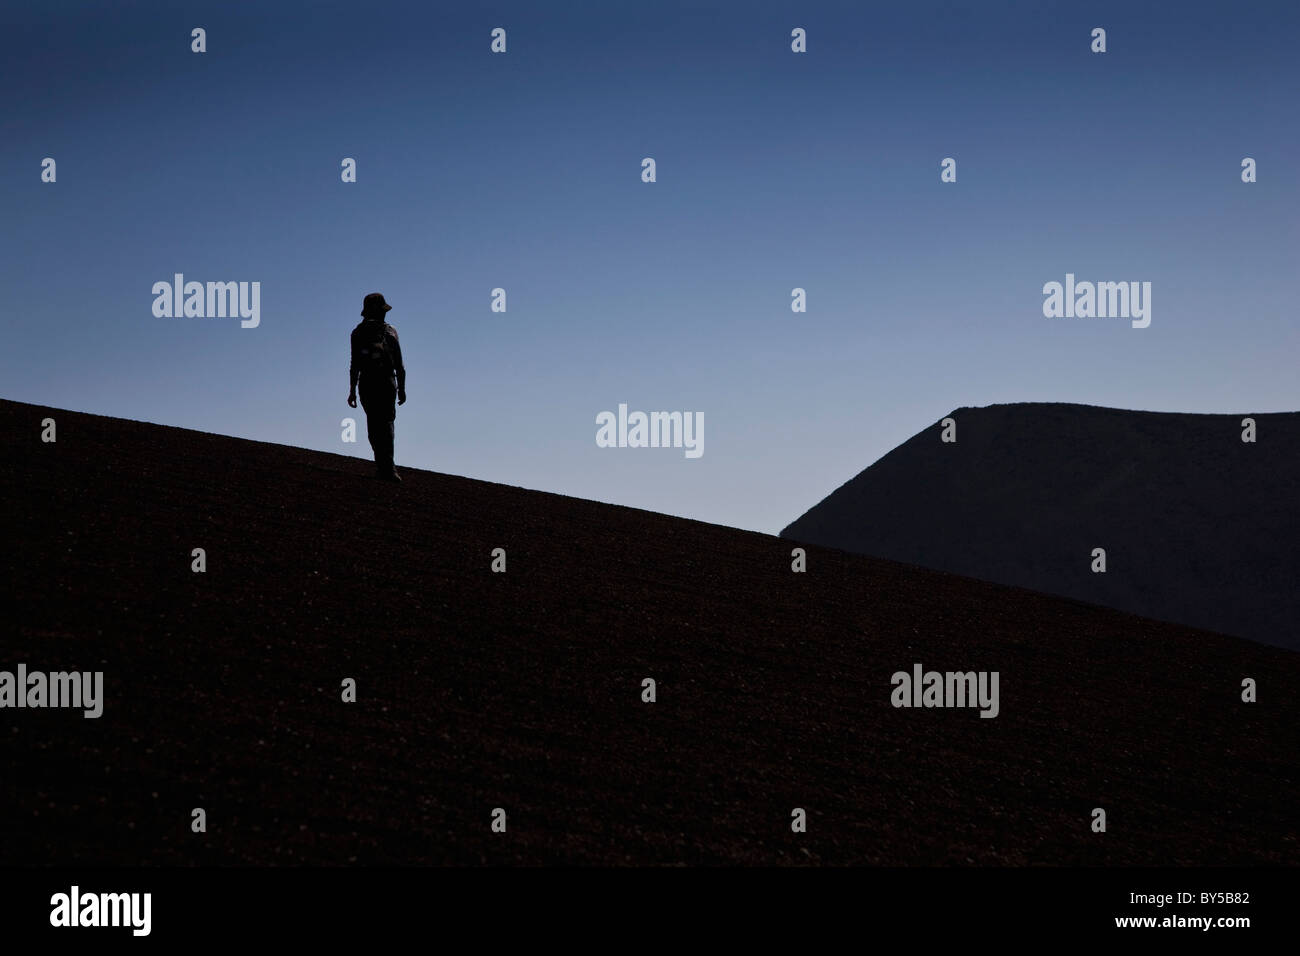 Silhouette of a person standing by Lonquimay Volcano, Patagonia, Chile Stock Photo